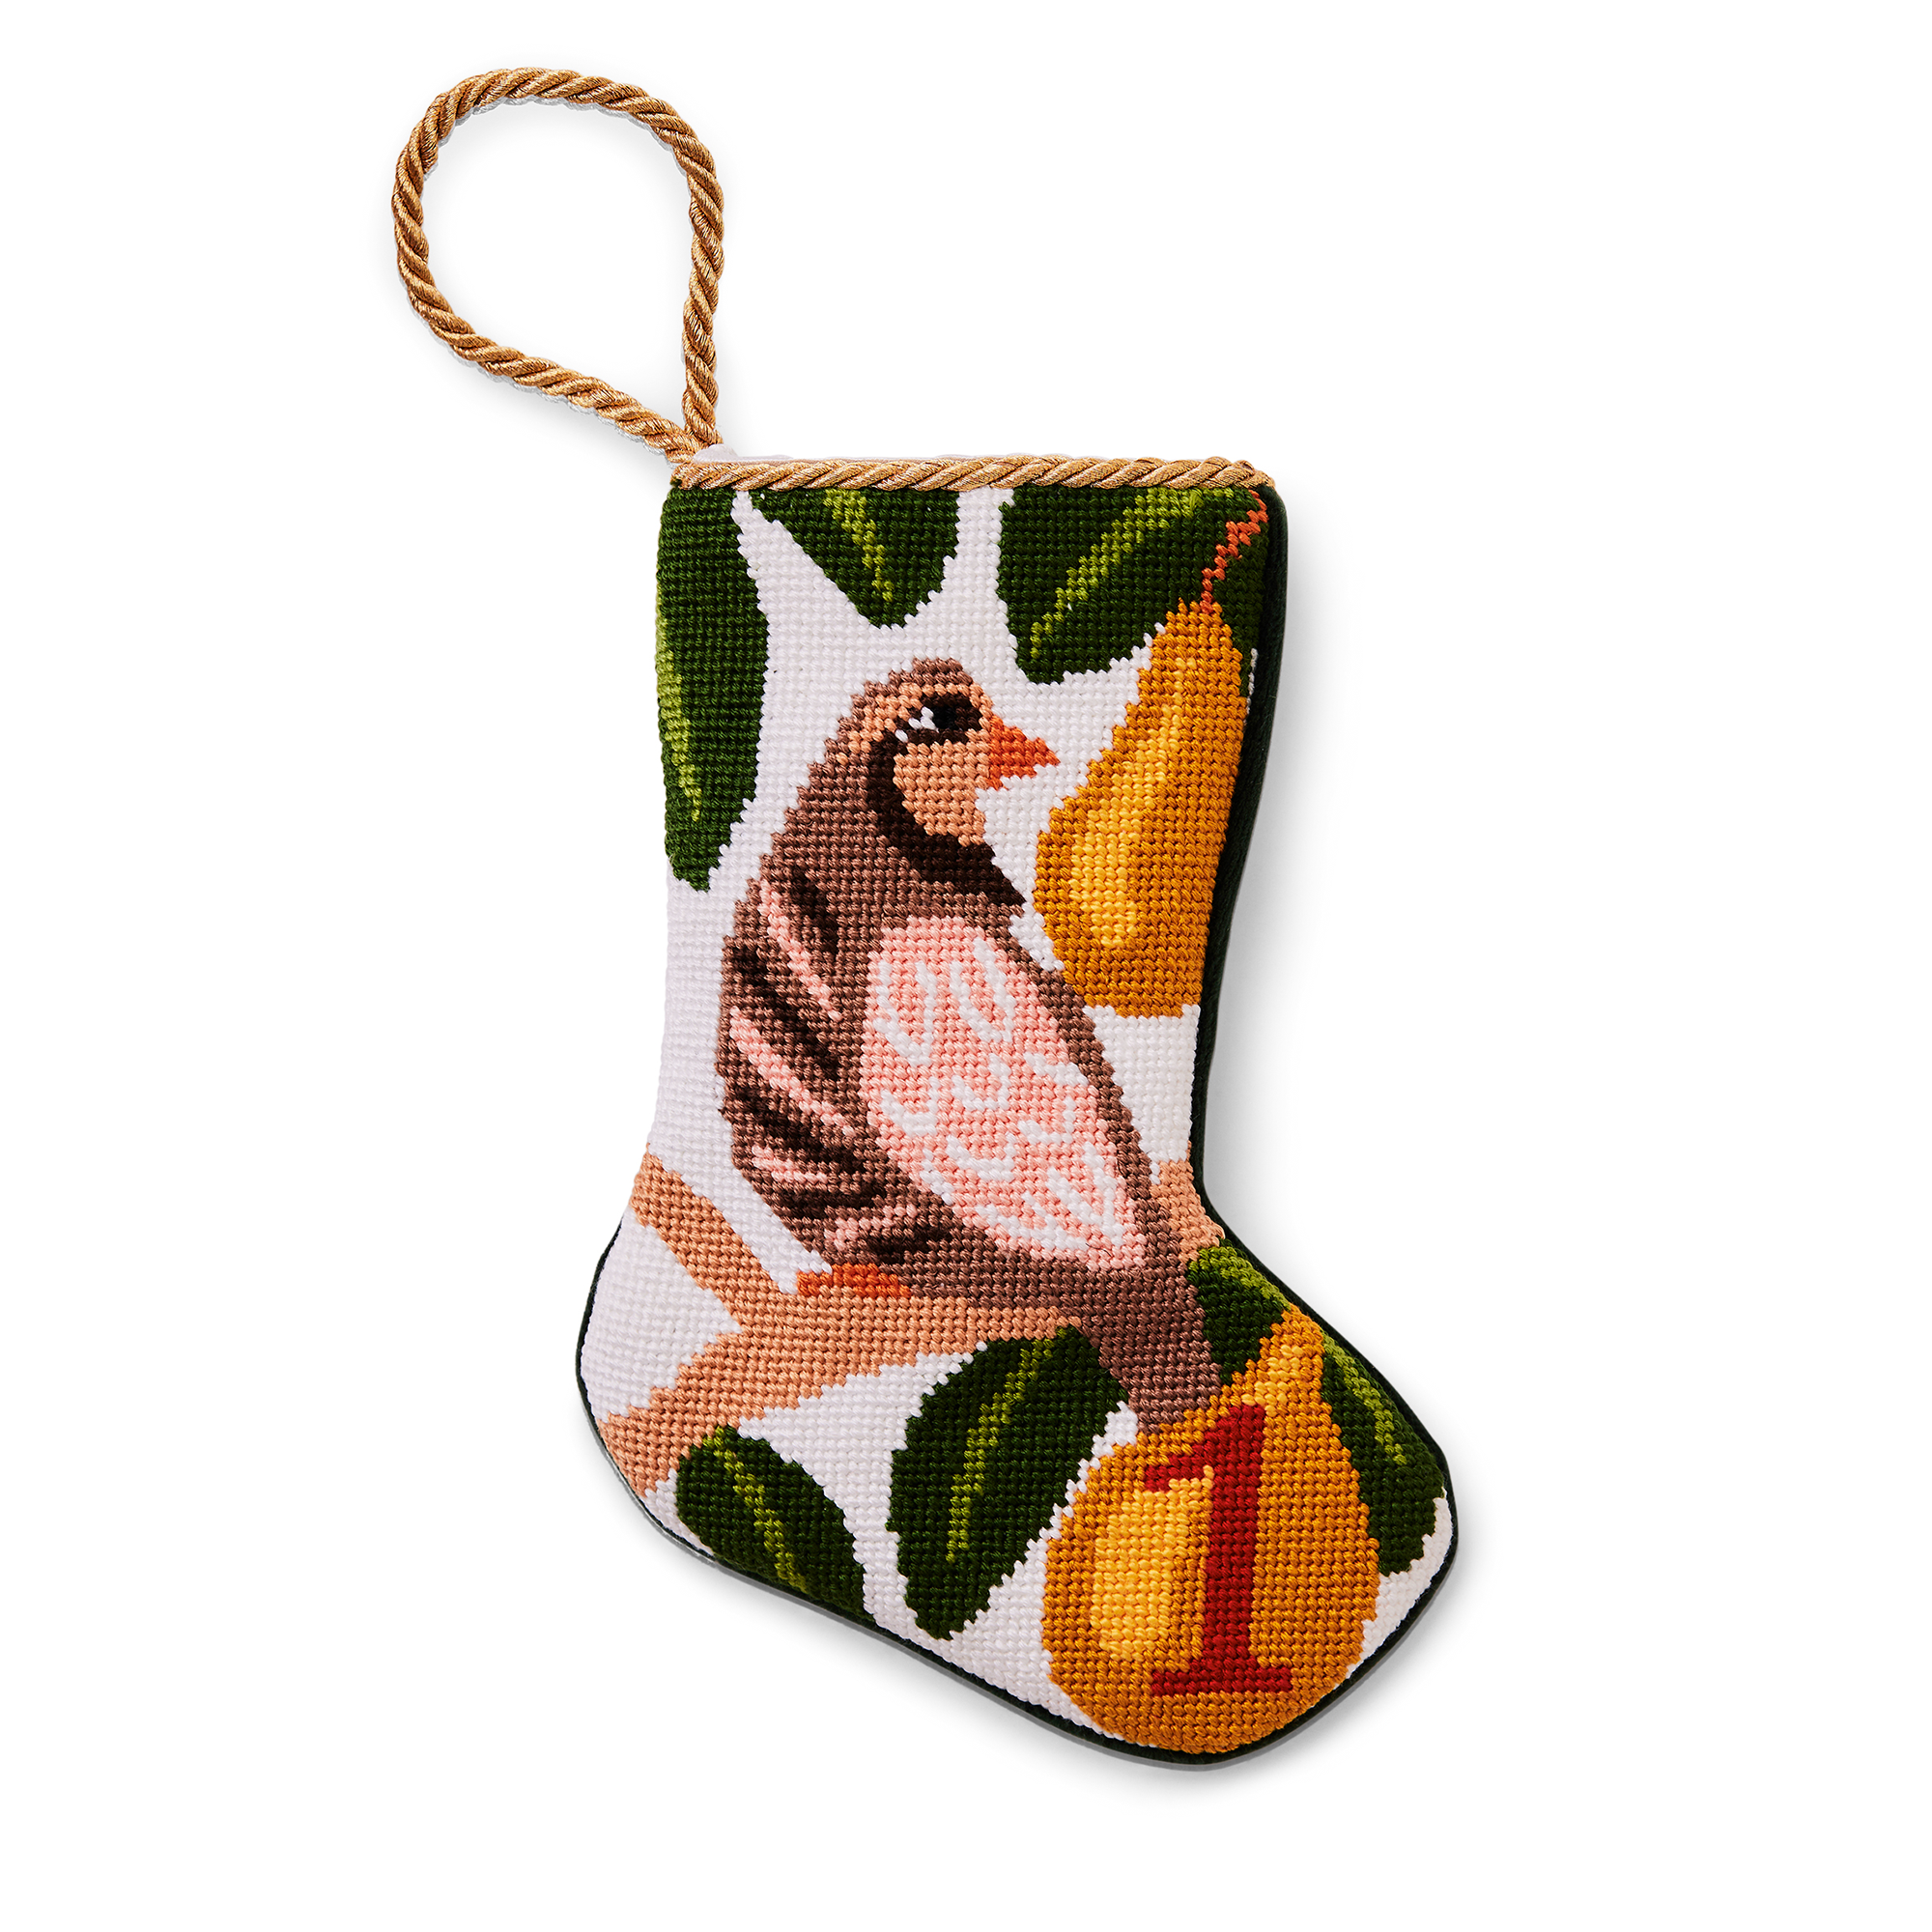 A charming Christmas stocking showcasing a needlepoint design of a partridge perched in a pear tree, inspired by the "12 Days of Christmas" song. The vibrant illustration includes green leaves and golden pears. A gold loop is perfect for hanging by the fireplace.